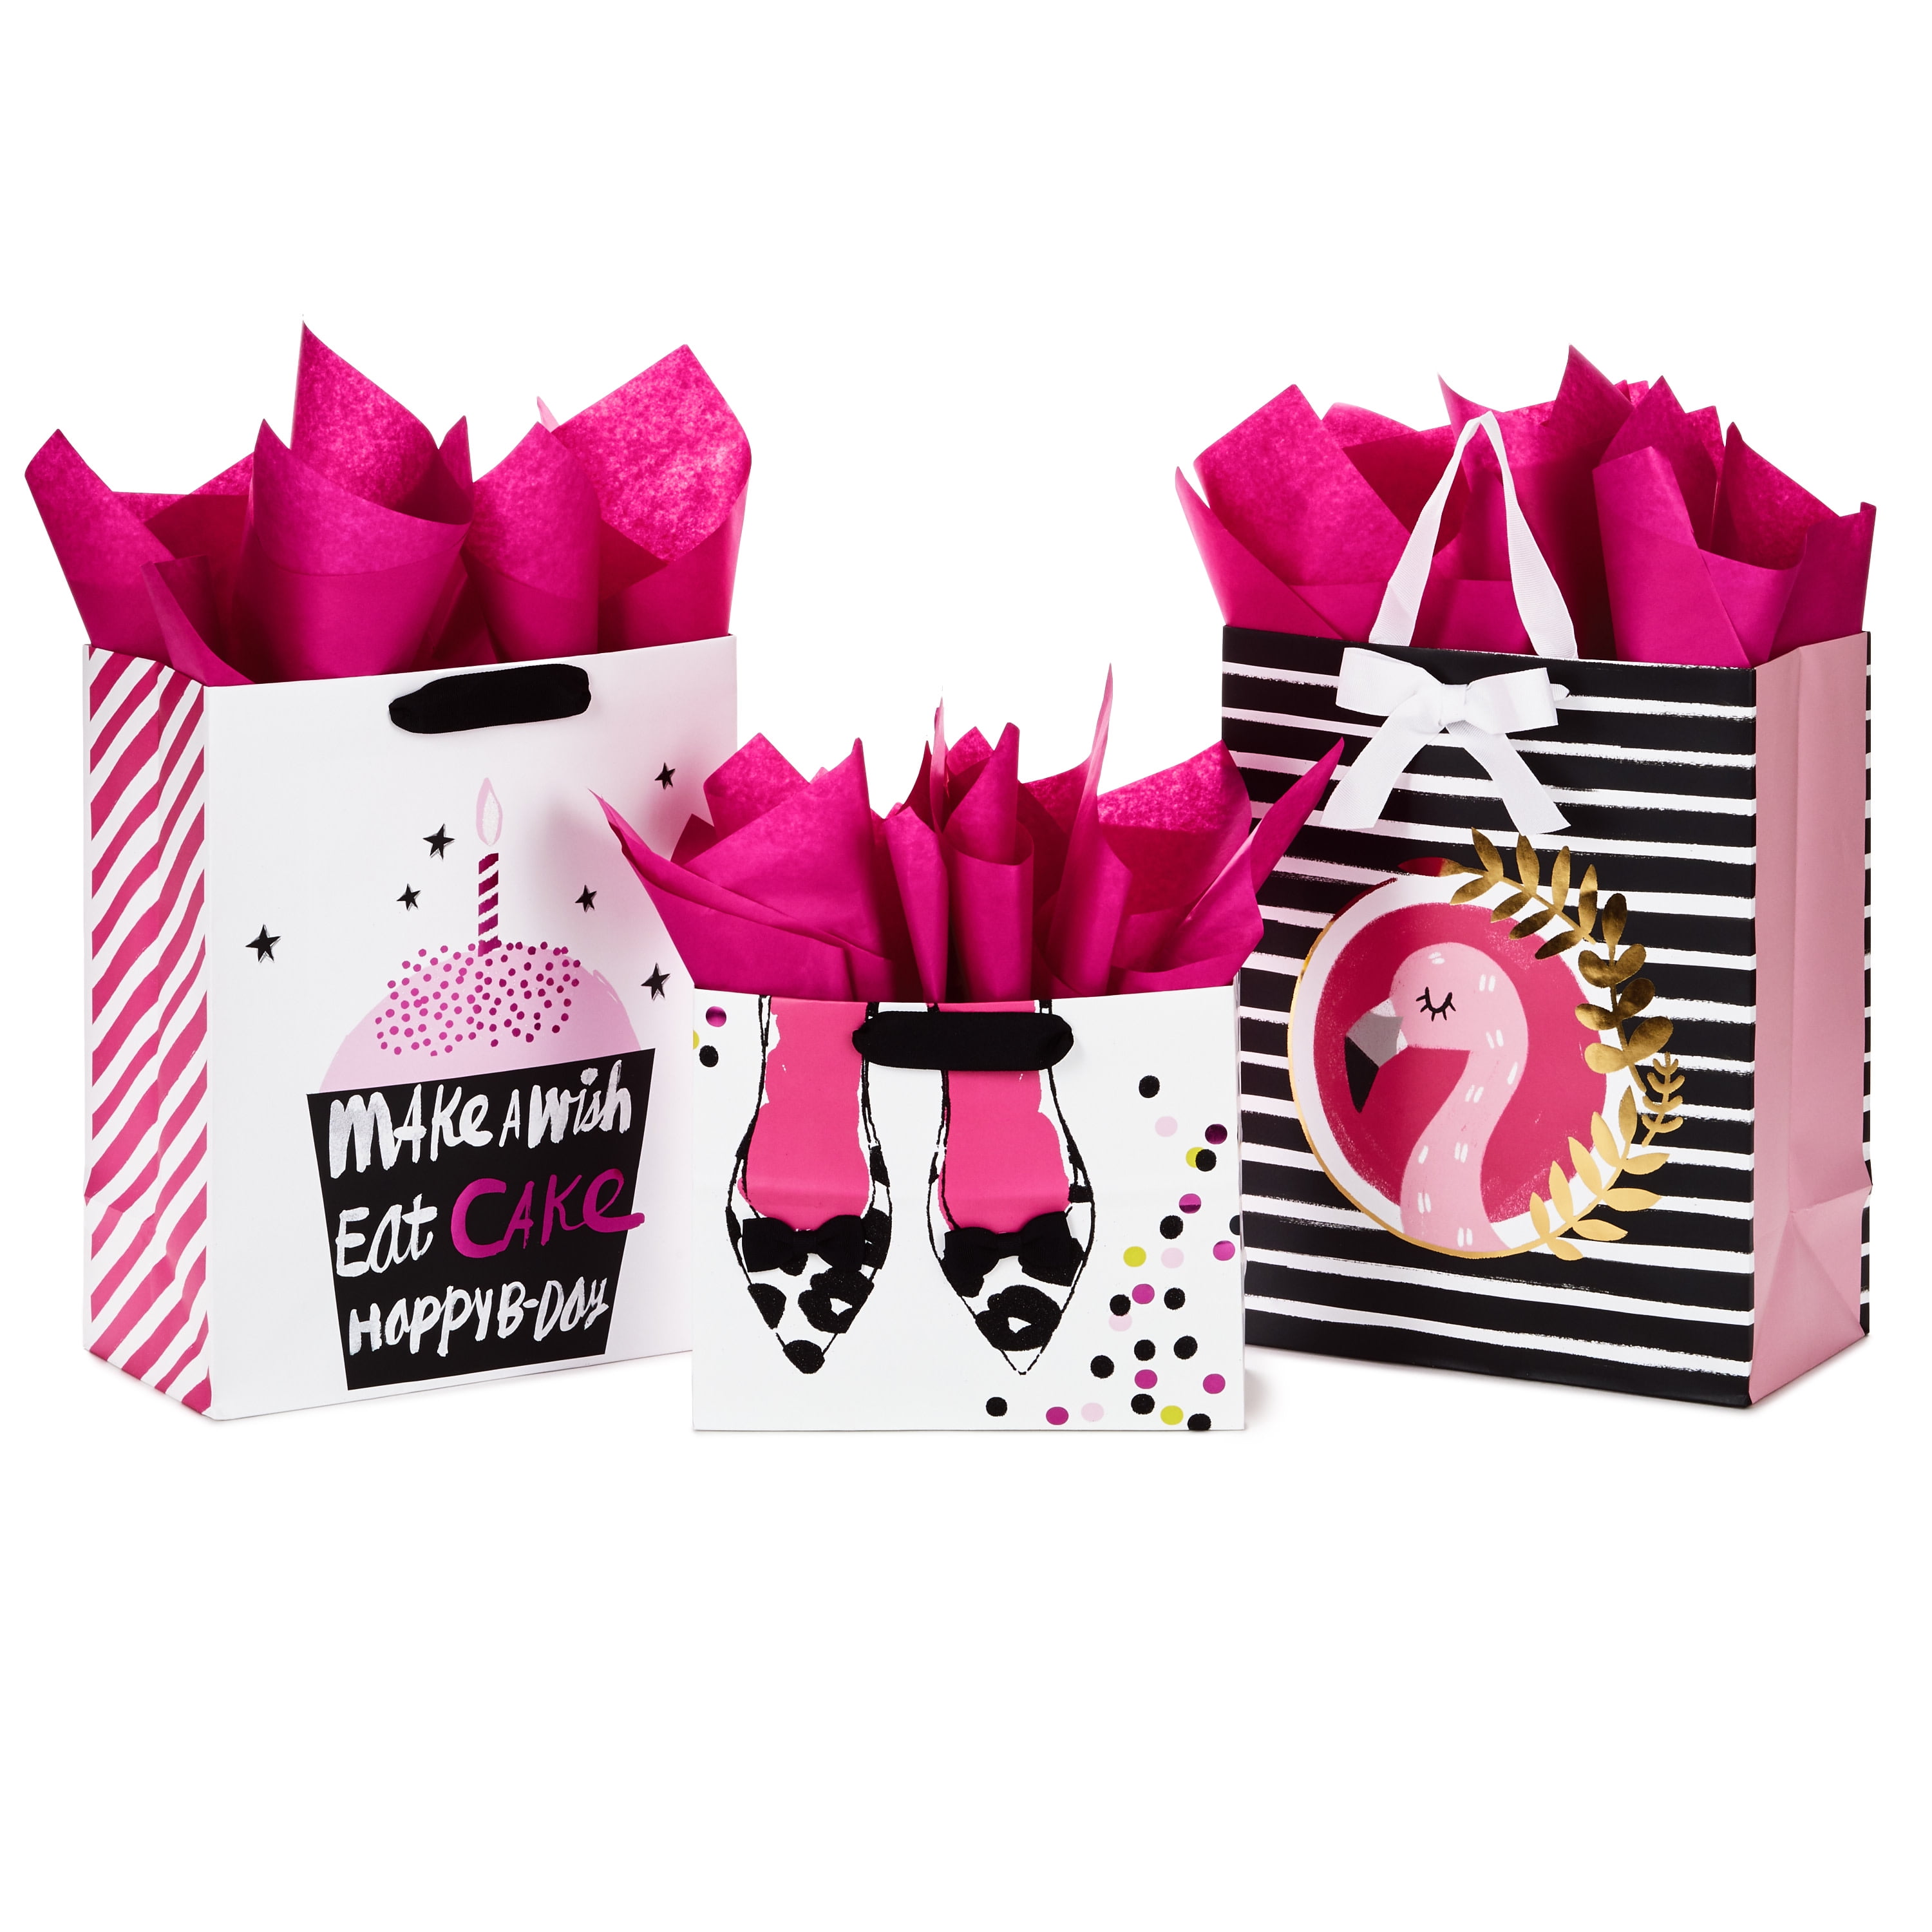 Nihuecne 9 Medium Size Gift Bags with Tissue Paper, 4 Pack Black Gold Wrap  Paper Gift Bags with Handles for Shopping, Parties, Birthday, Holiday